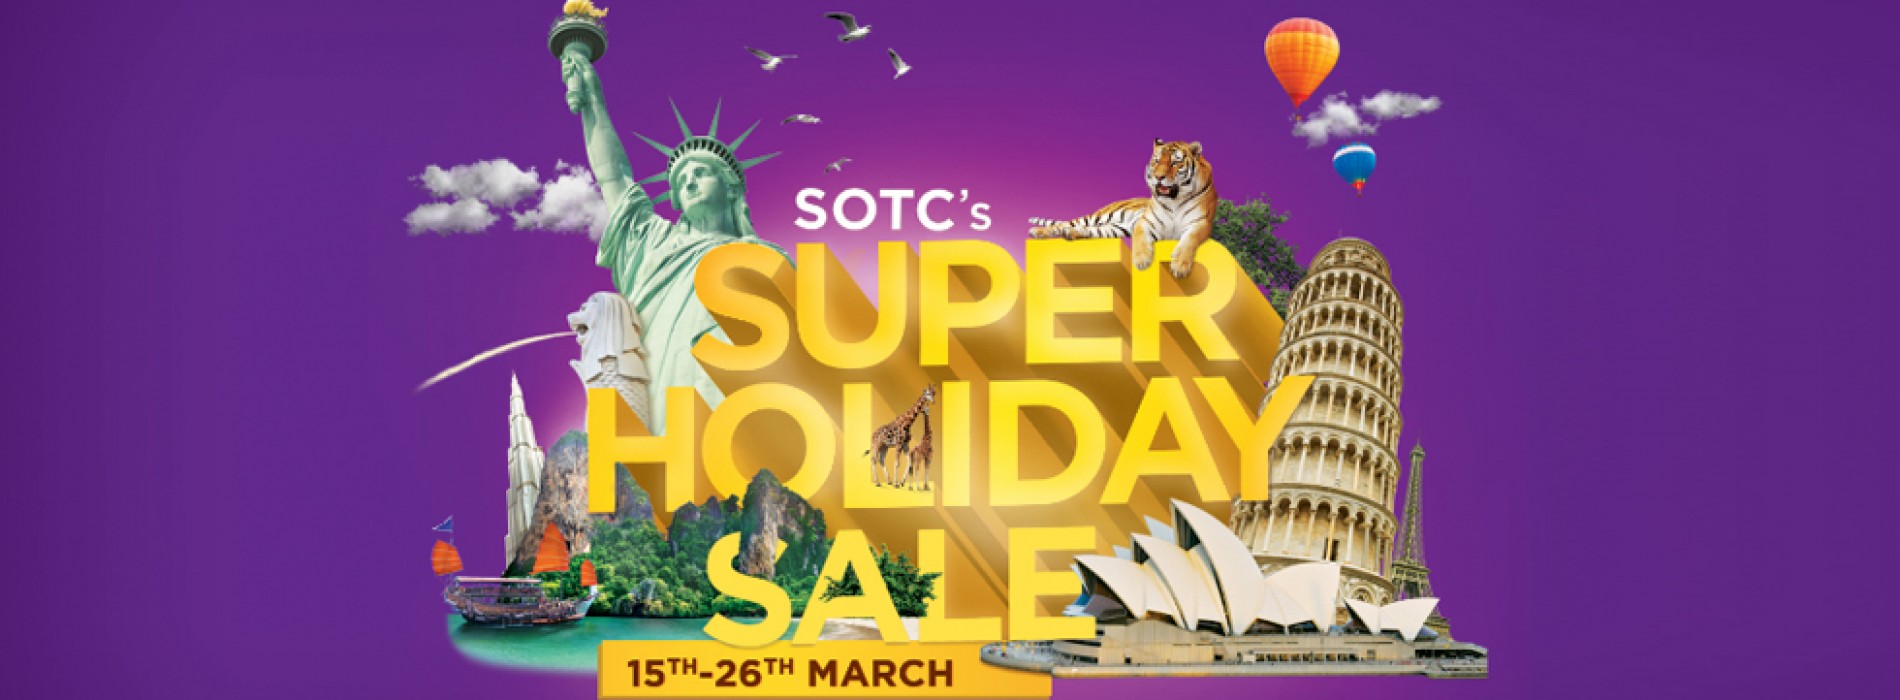 SOTC launches The Super Holiday Sale to entice customers this holiday season